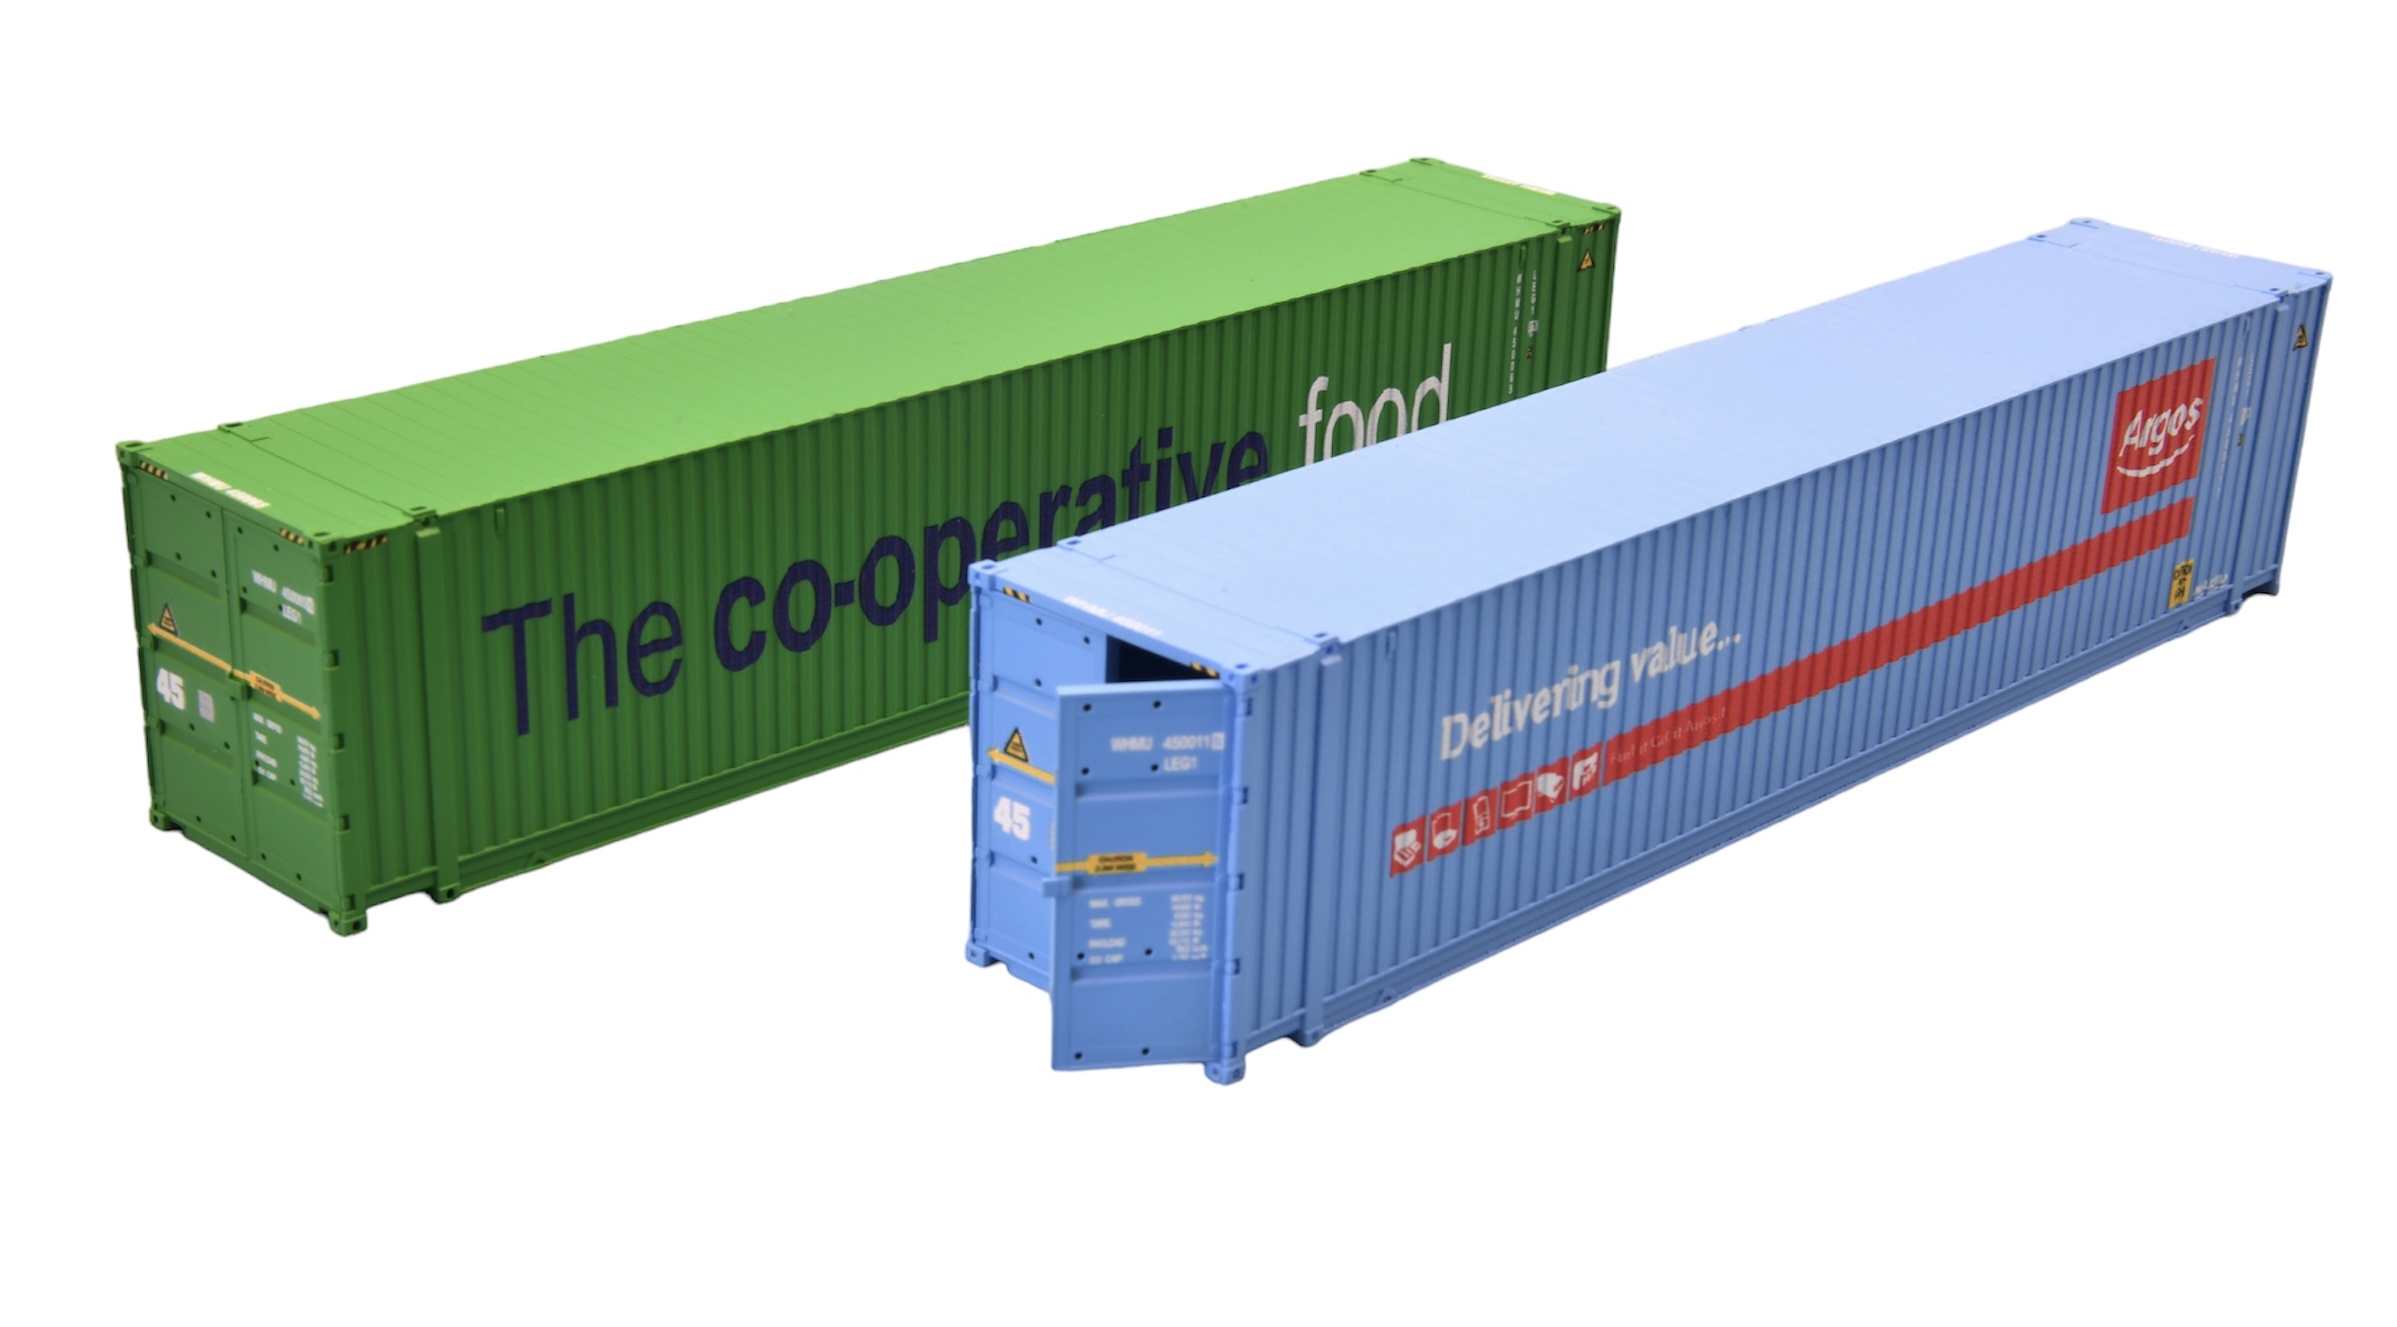 4F-028-001 45 Foot Container Hi Cube Twin Pack Argos / Co-operative